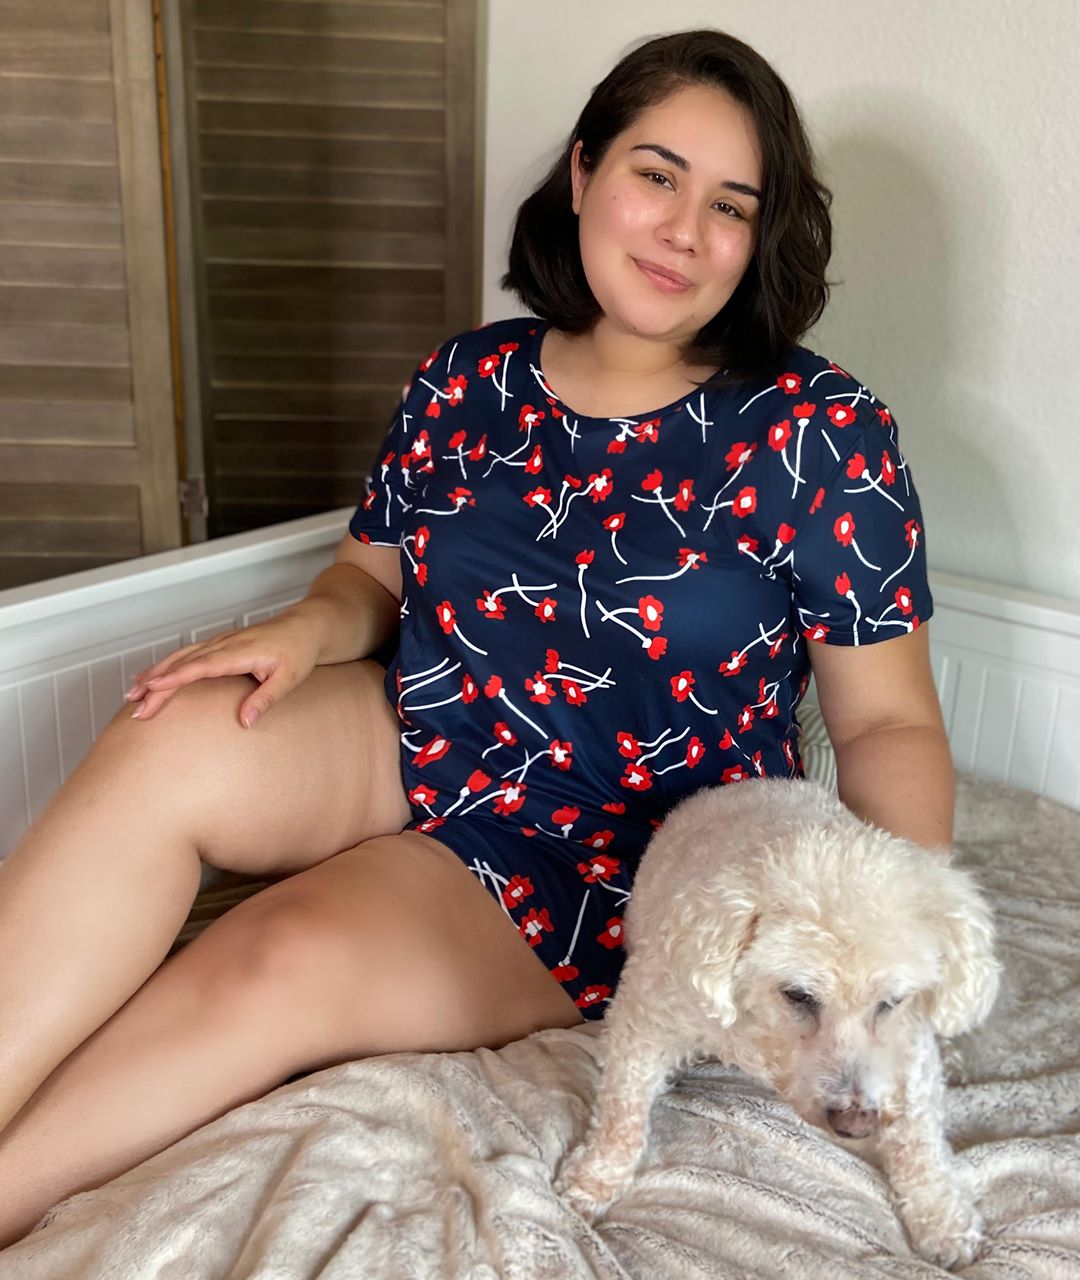 Rosegal - Bio Link:ROSEGAL CLEARANCE ZONE(OVER 79USD, GET 40USD OFF)⁣
⁣
⁣
ROSEGAL Pajama, reviewed by @kianatori⁣
Use Code: RGH20 to enjoy 18% off!⁣
#rosegal #plussizefashion #Rosegalcurvygirl #curvyg...